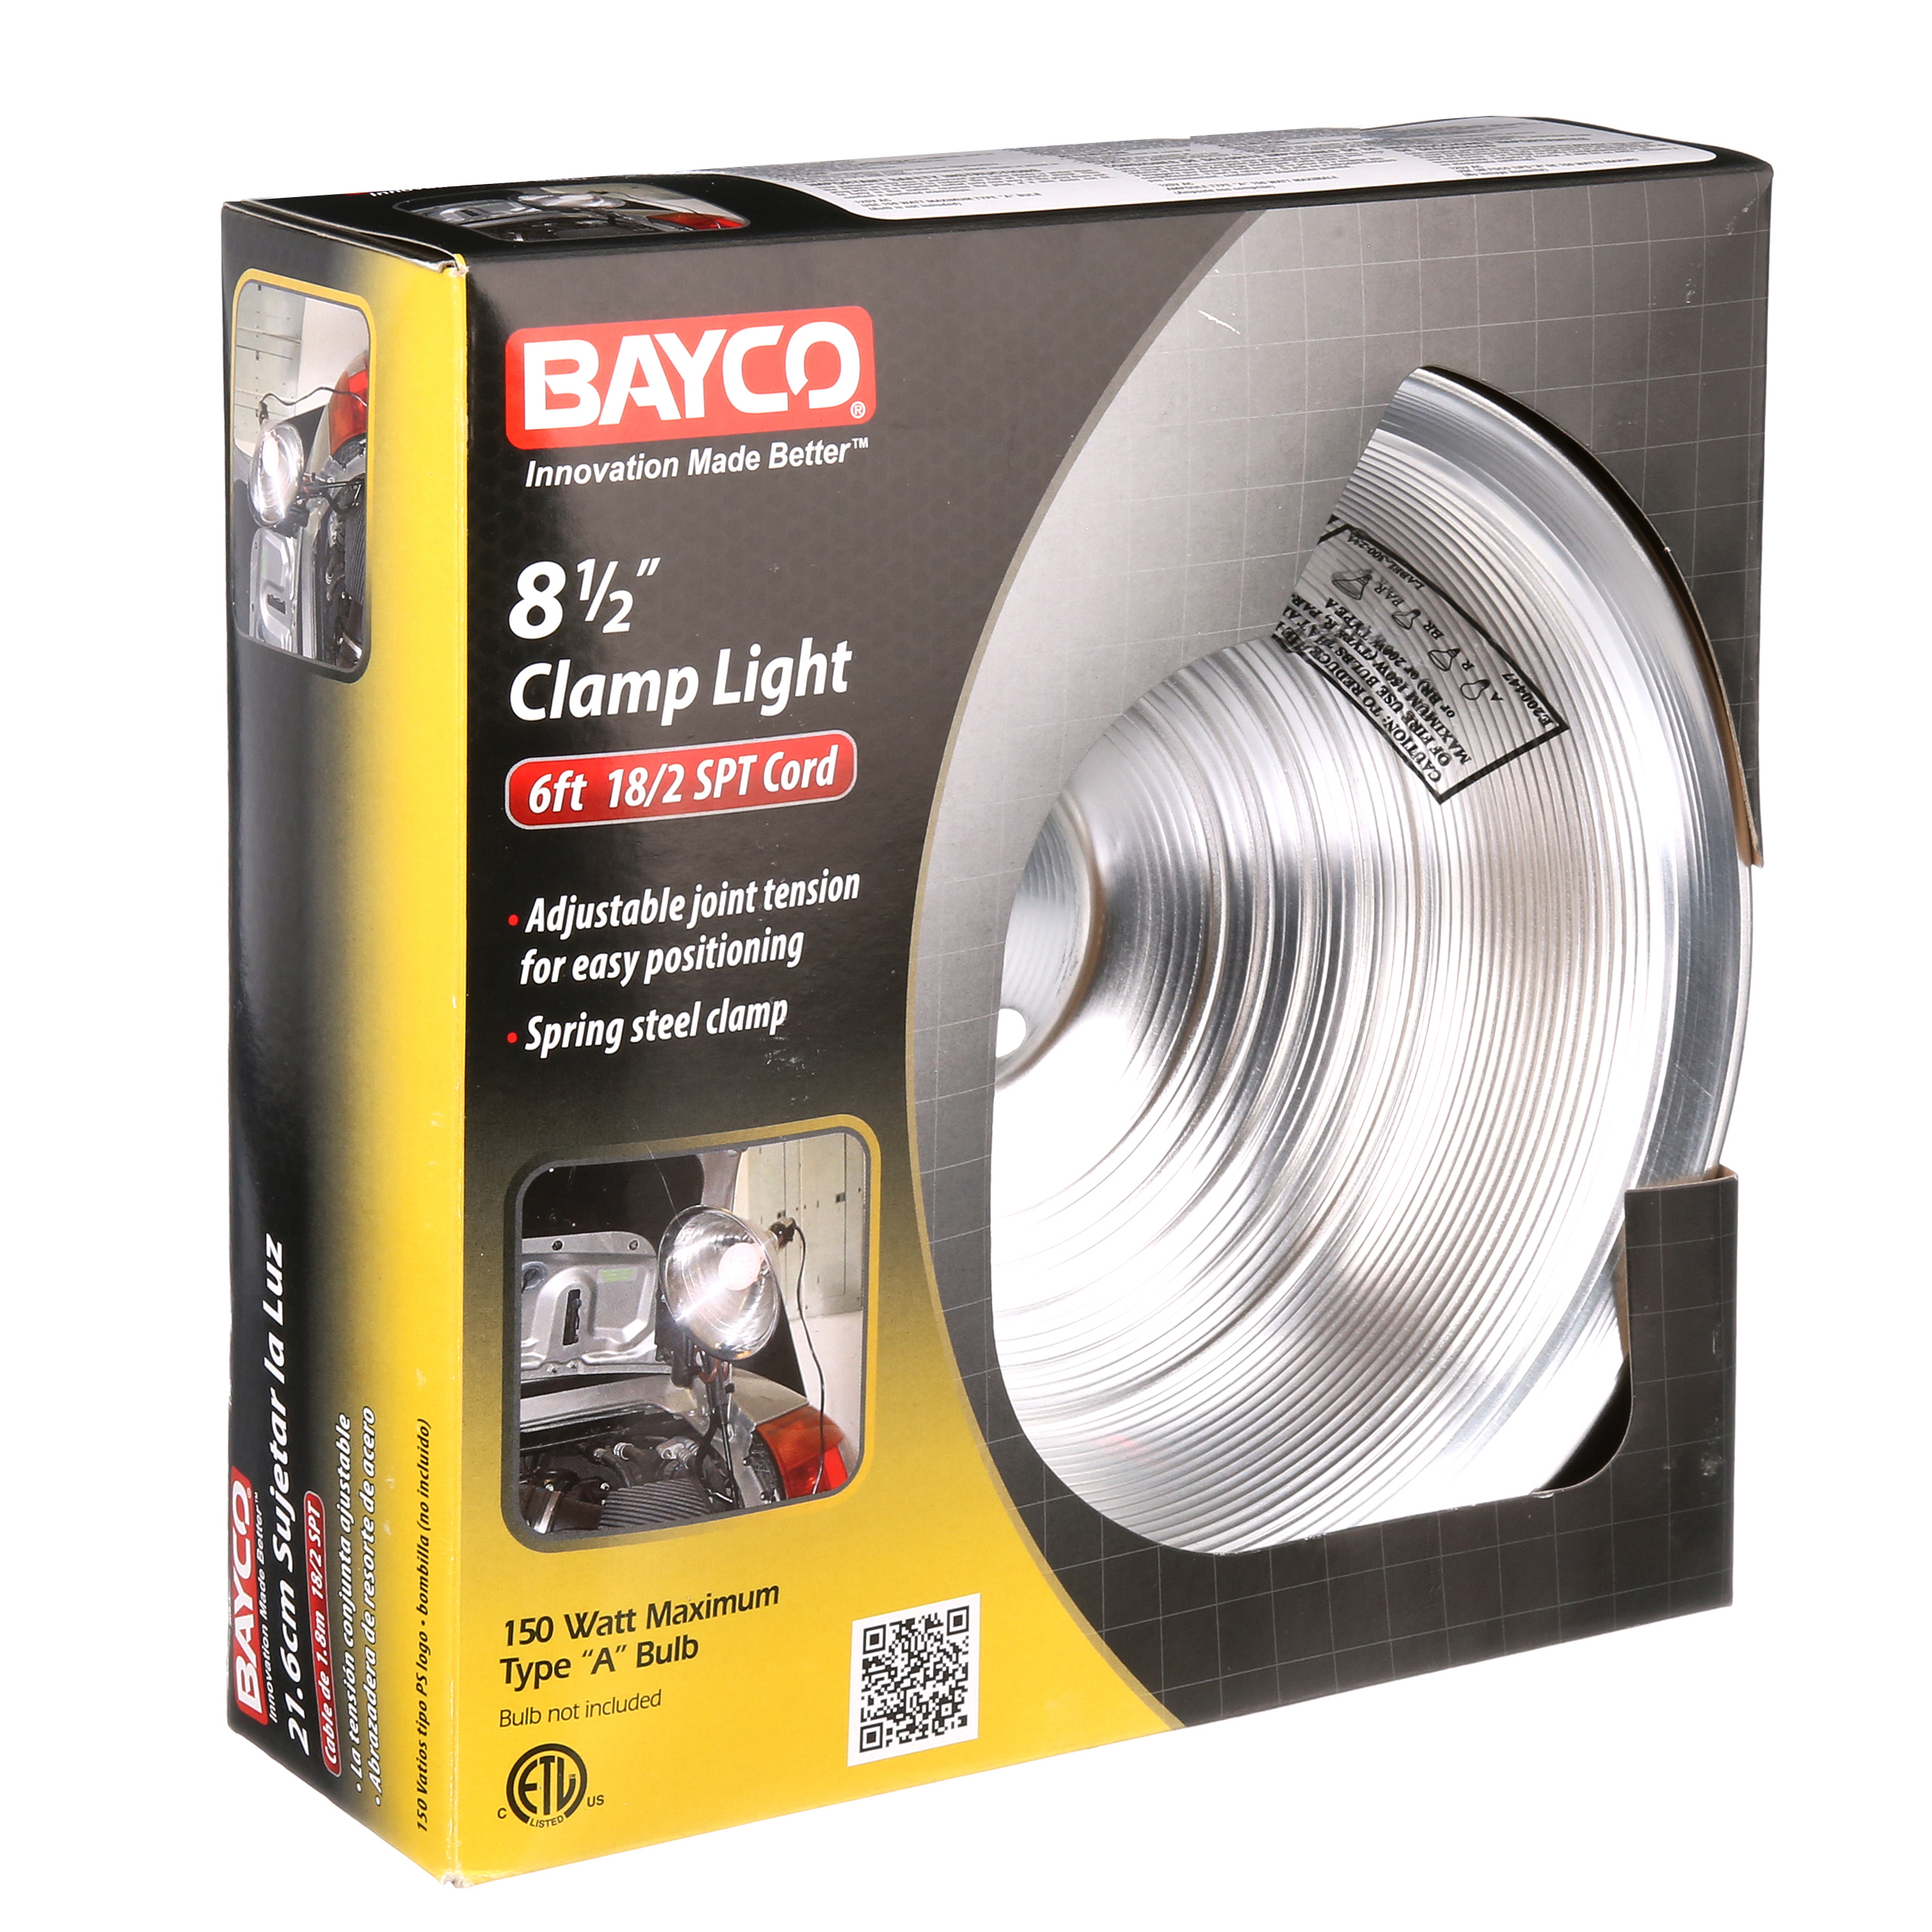 Bayco SL-300 8.5-inch Clamp Light with Aluminum Reflector - image 3 of 11